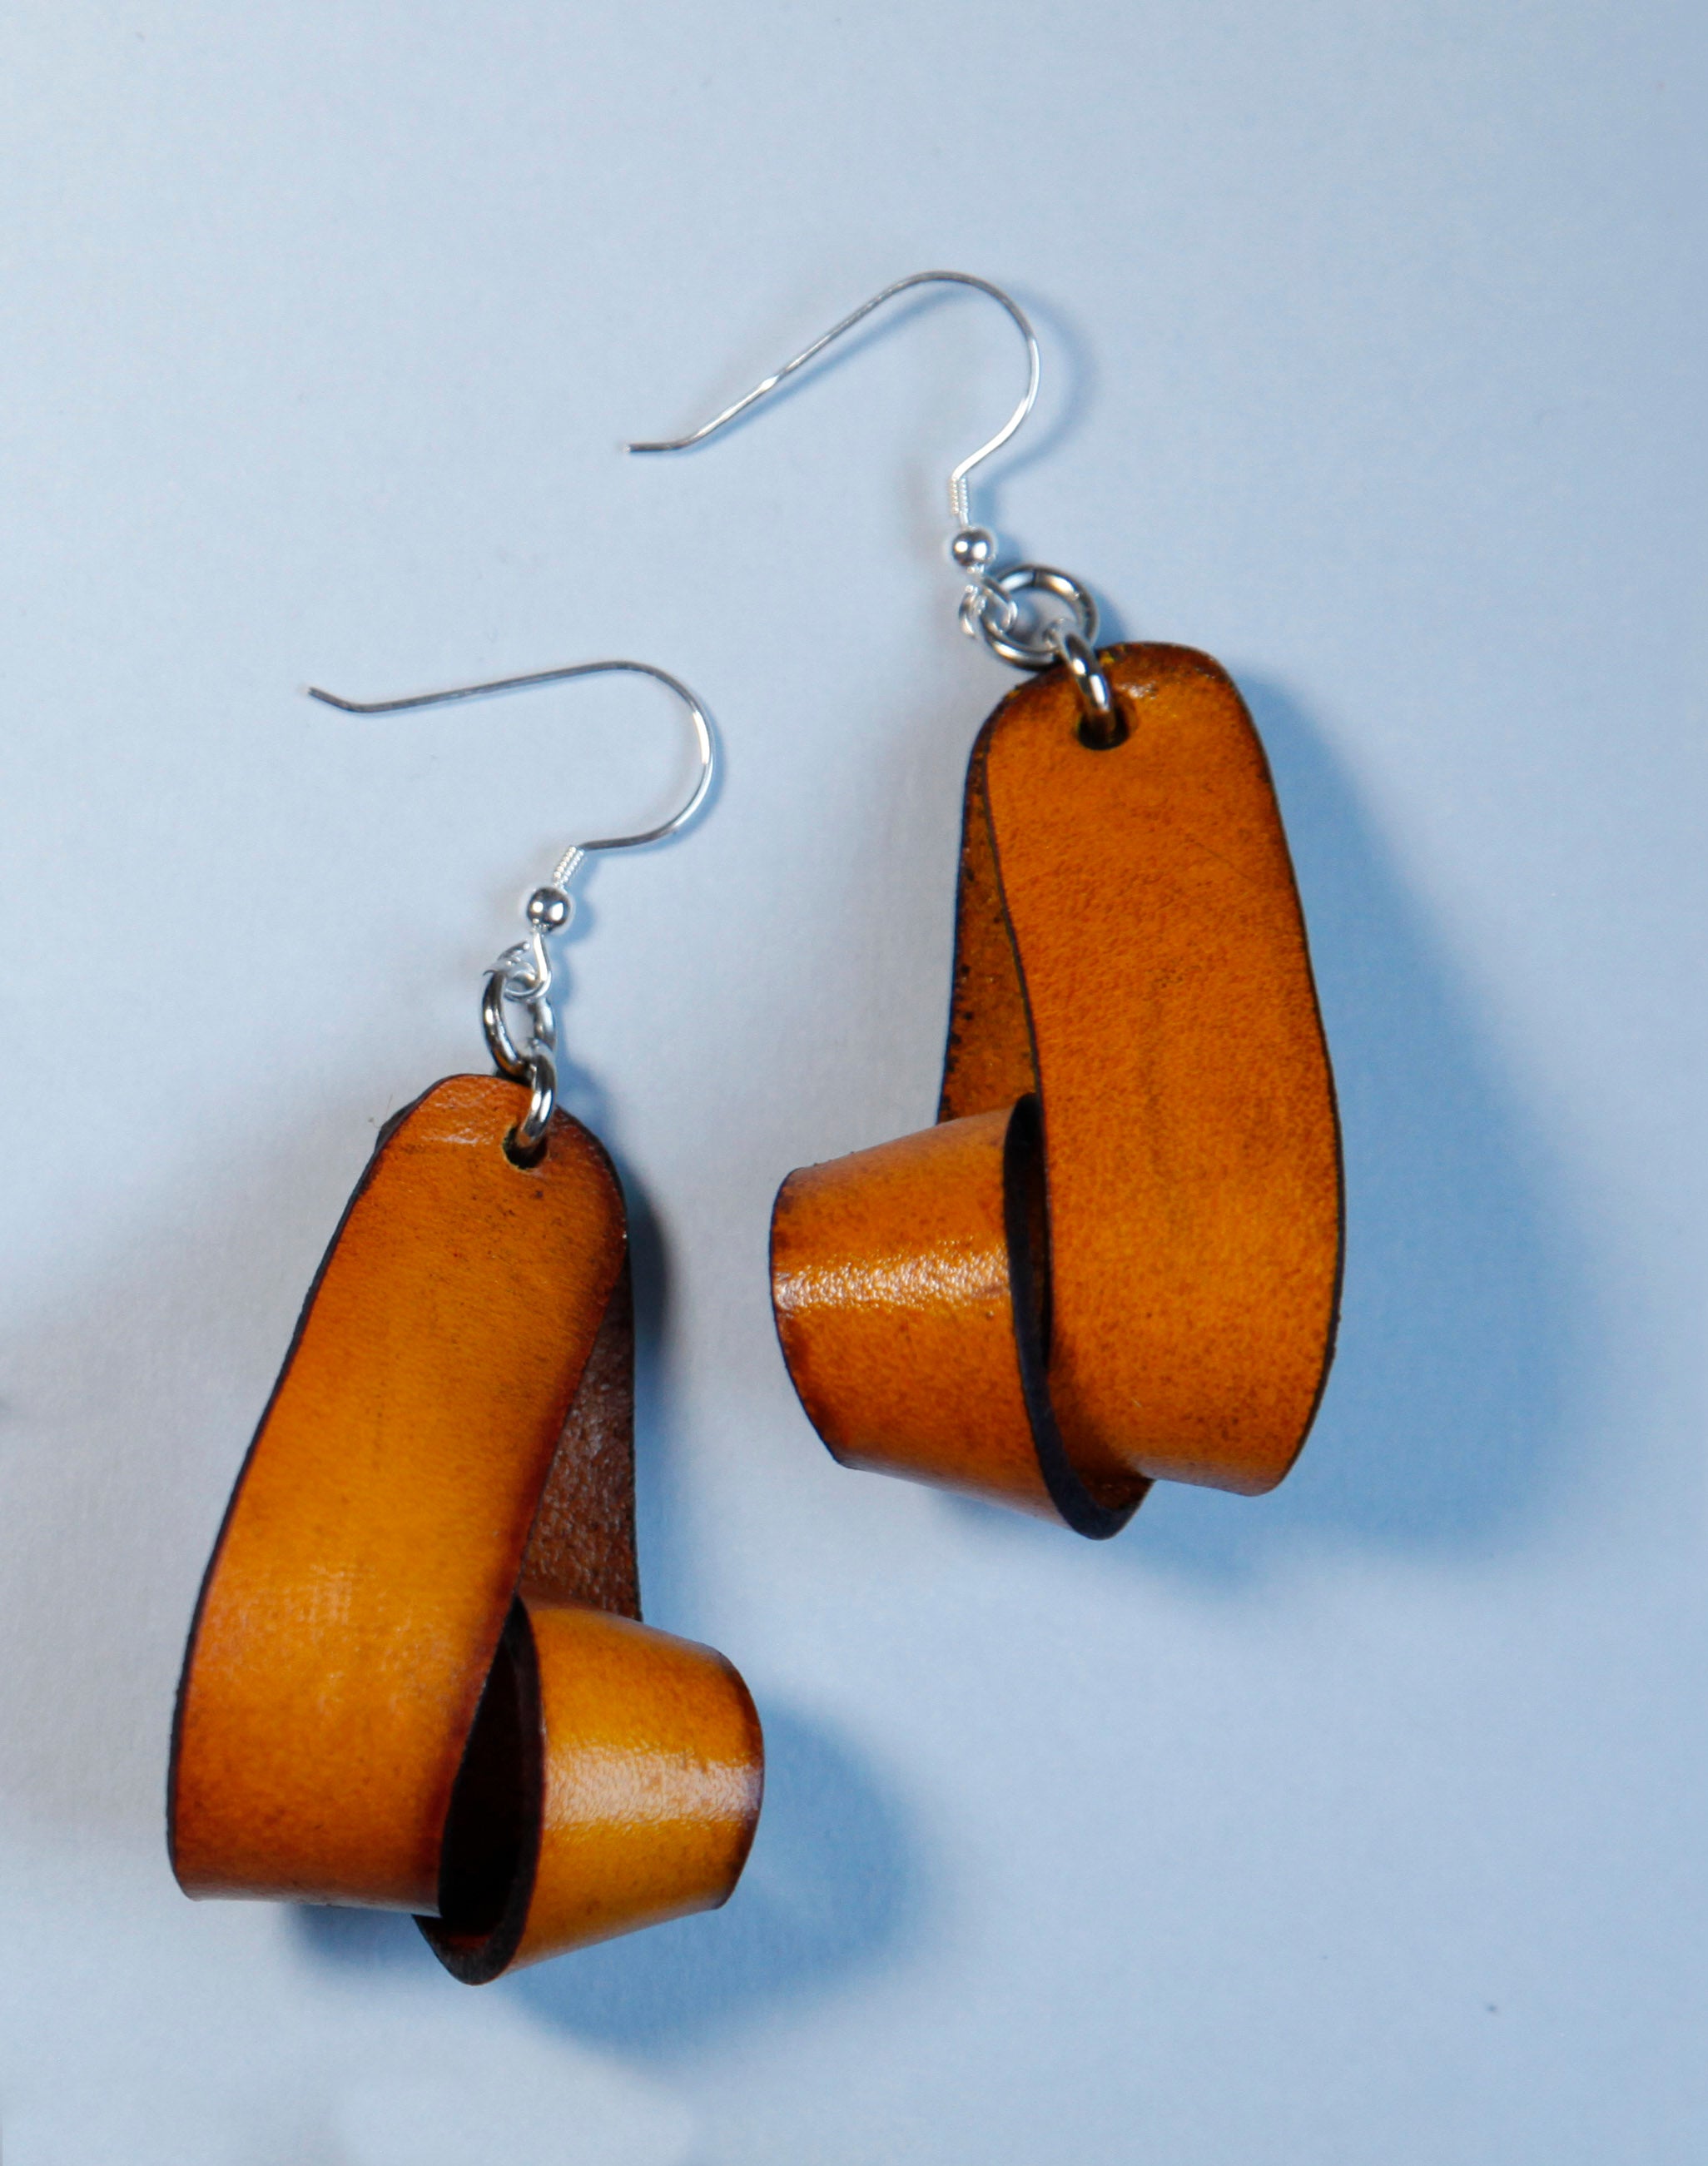 The Carla Medium Leather Earrings - Tan (Hand Dyed) - Amber Poitier Inc.